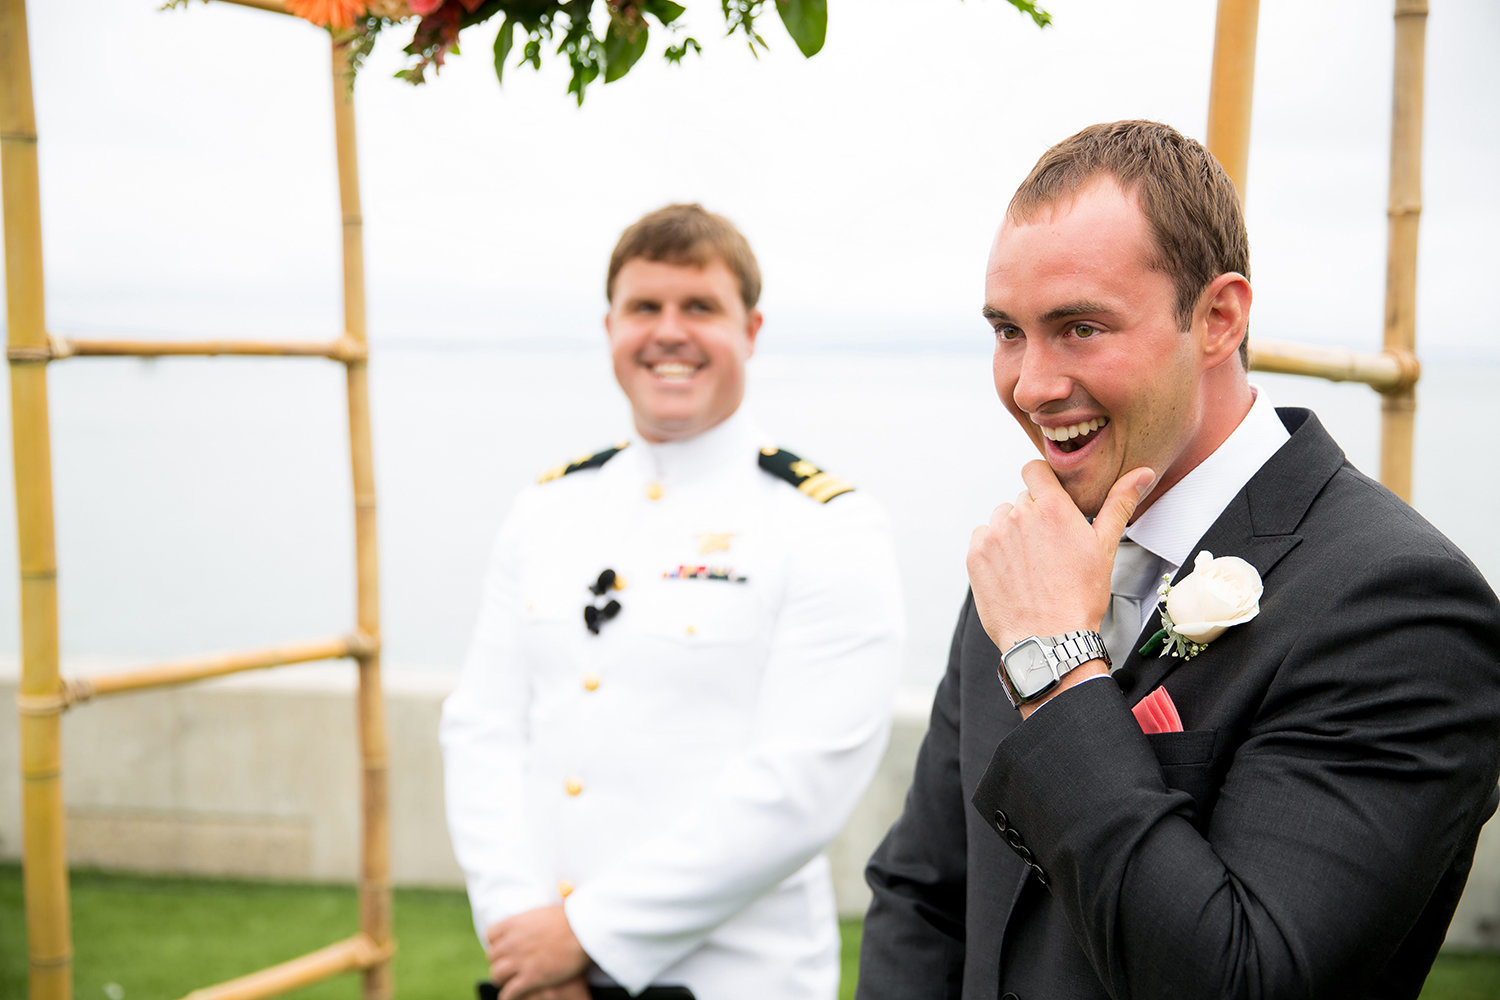 Point Loma Sub Base wedding photos groom seeing bride first time at ceremony